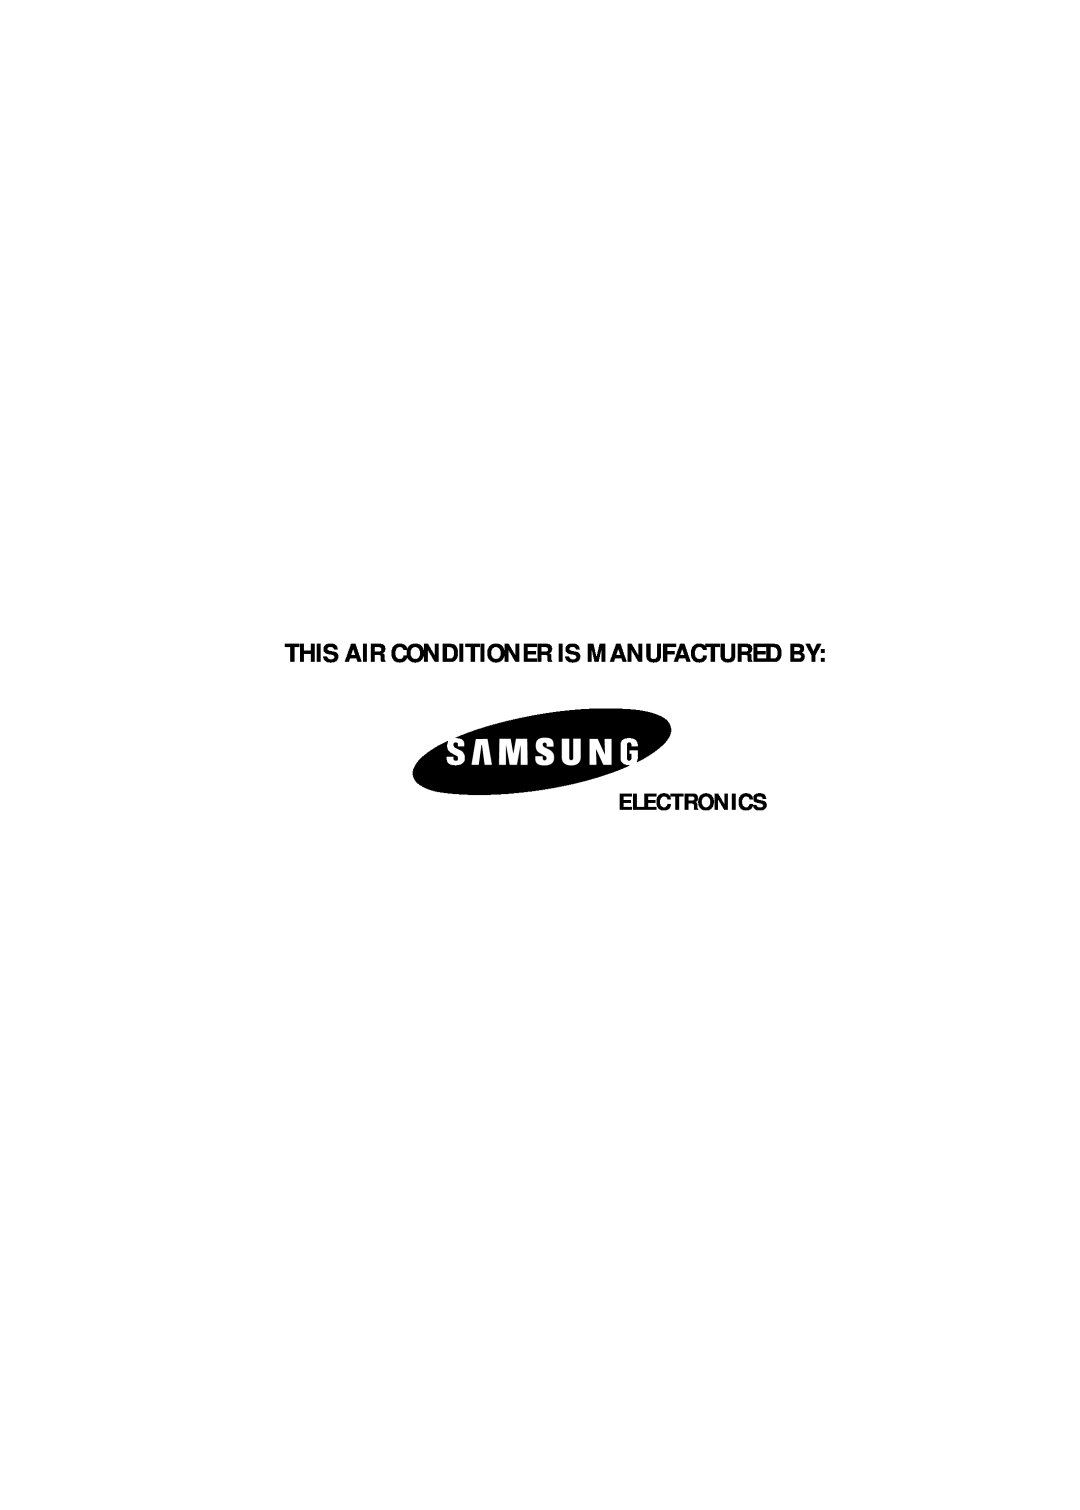 Samsung AS12CM1X, AS09CM1X, AS09CM2X, AS09CM2N, AS09CM1N, AS18CM1N This Air Conditioner Is Manufactured By, Electronics 